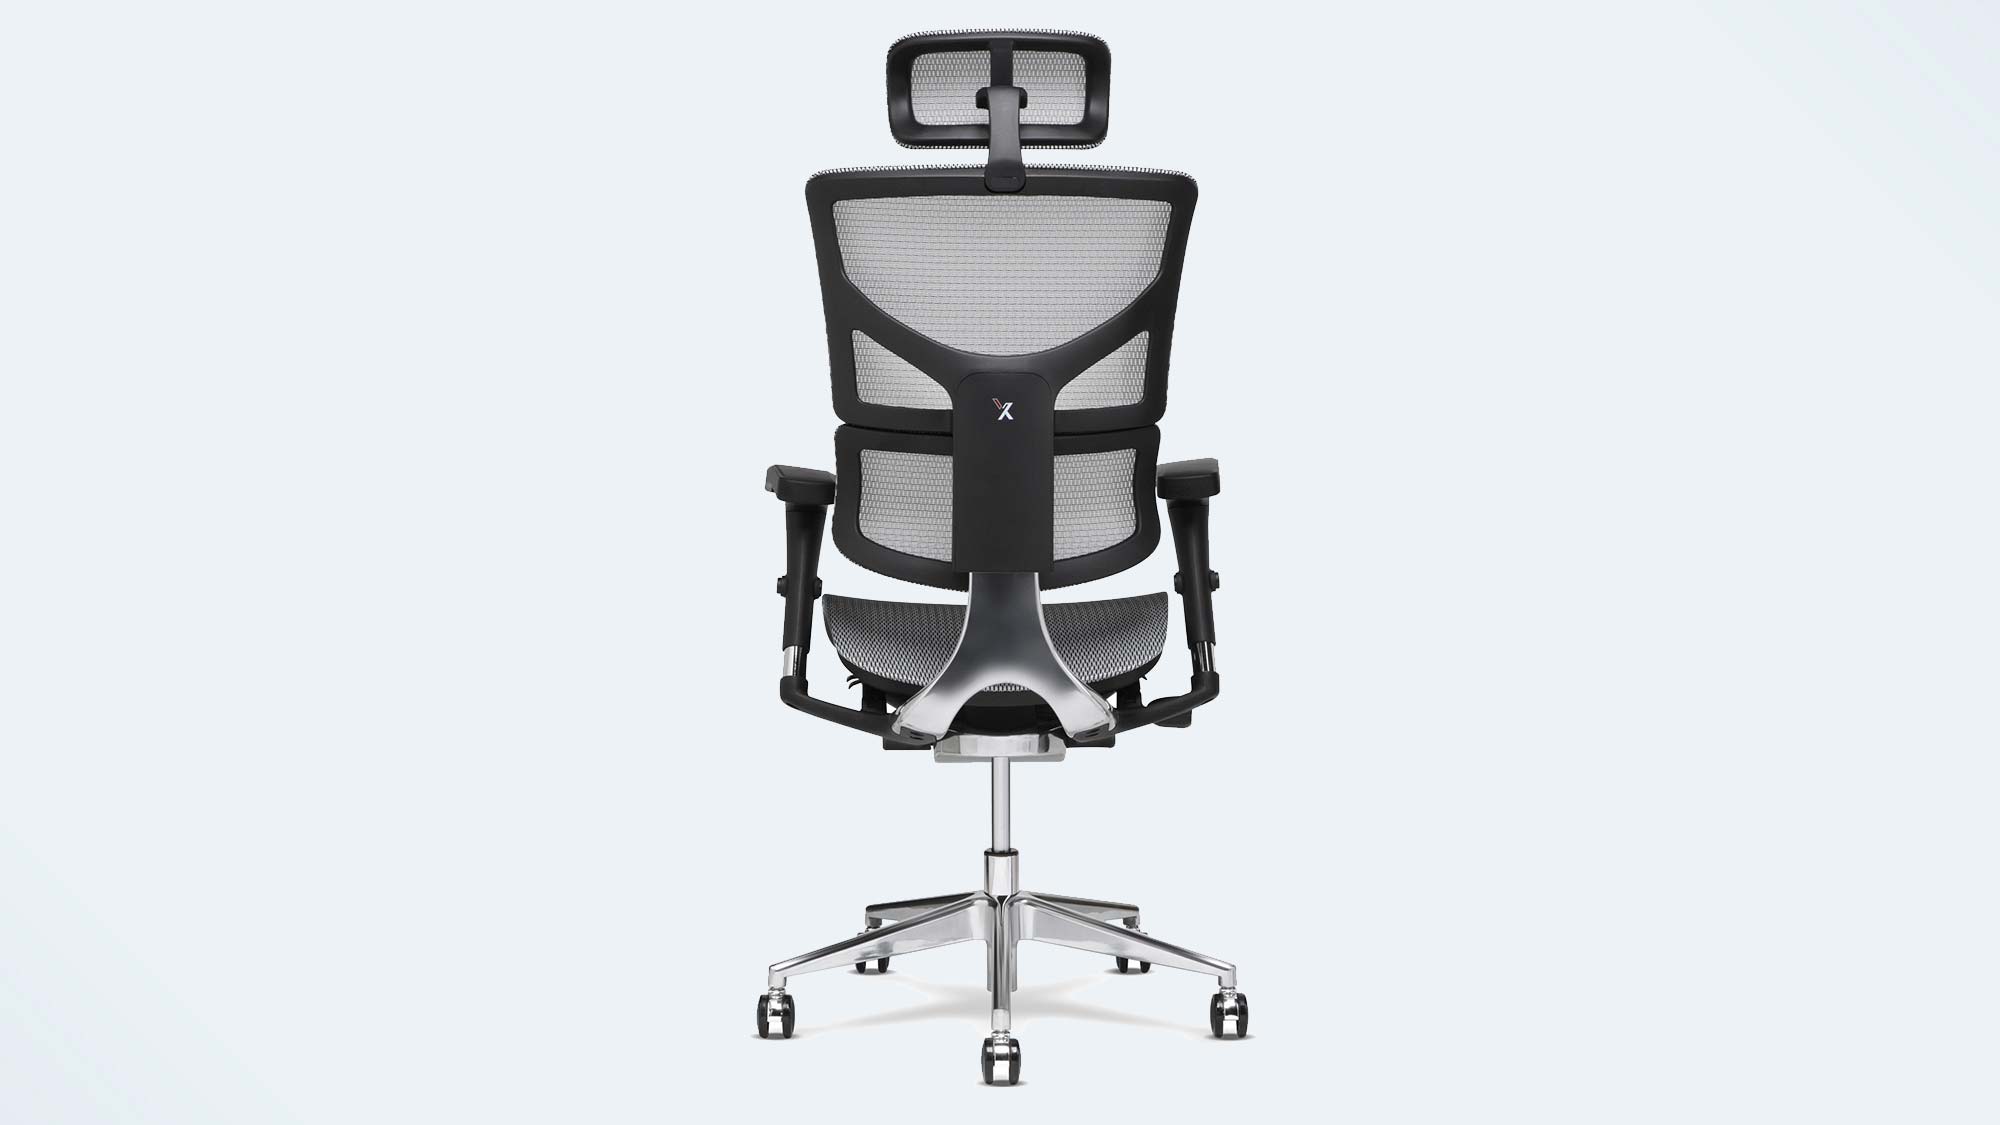 X-Chair X2 K-Sport Management chair review | Tom's Guide